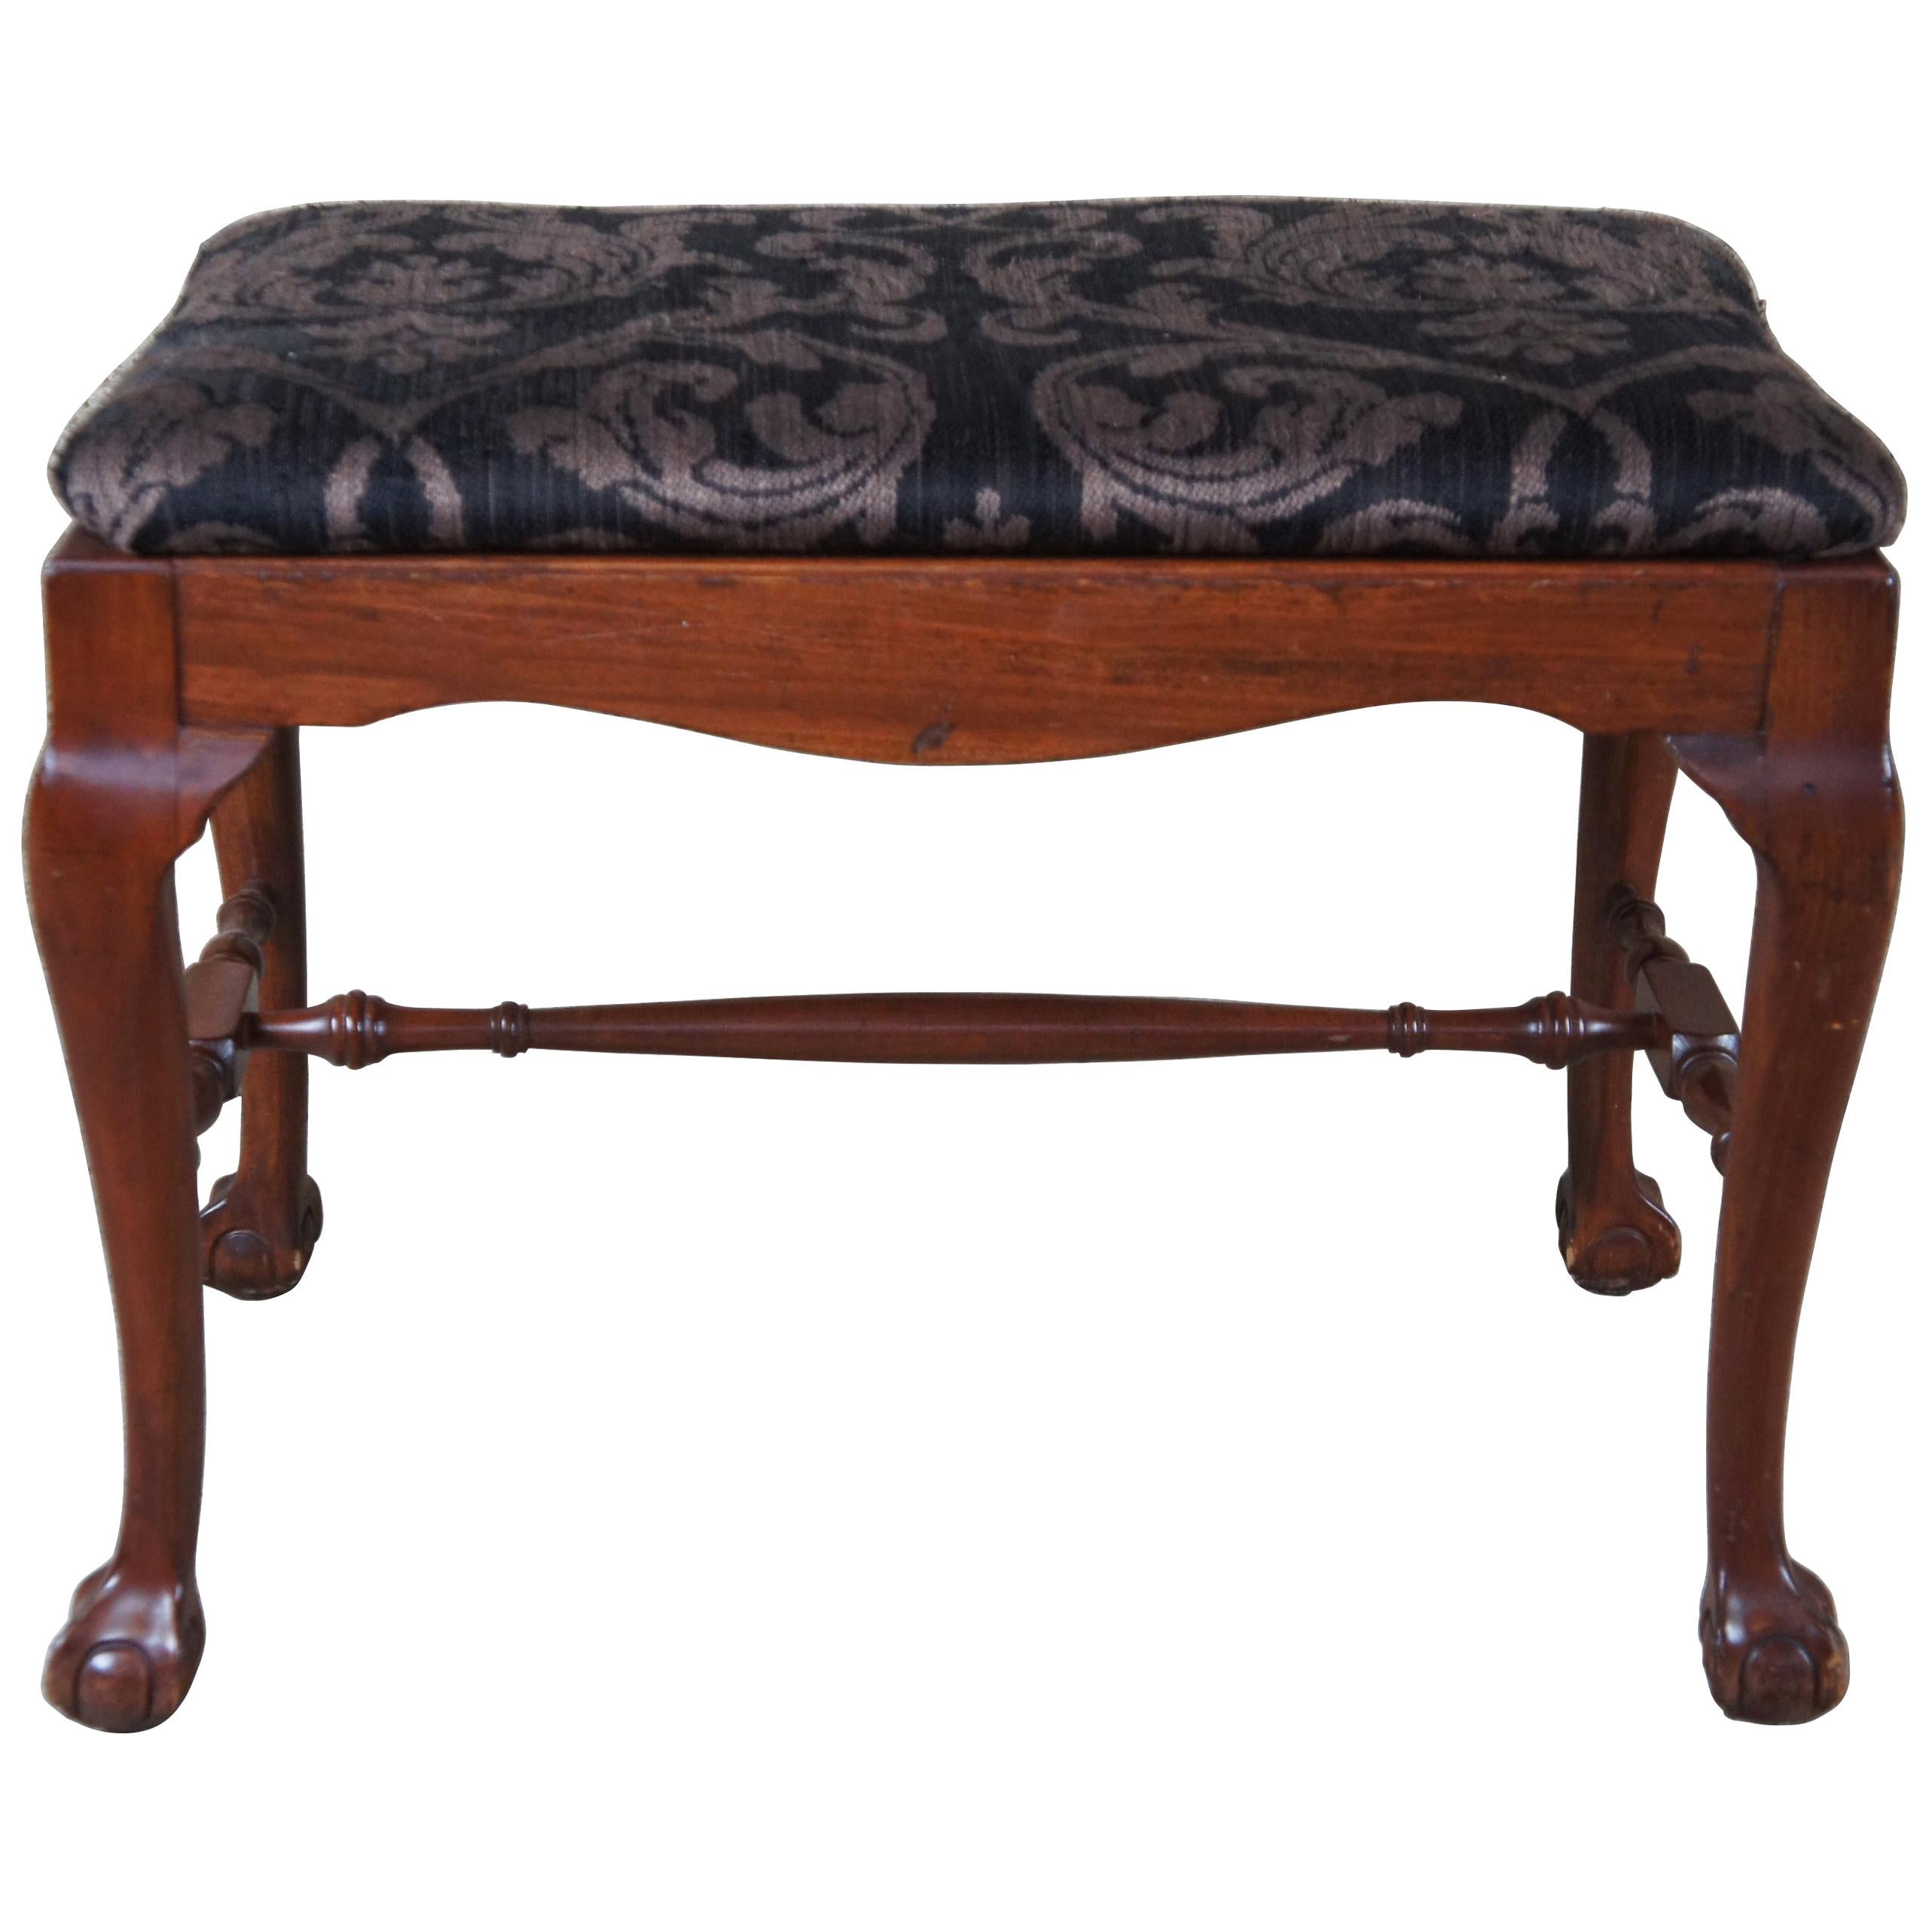 Chippendale Style Ball & Claw Vanity Stool Window Bench Foot Rest Piano Seat